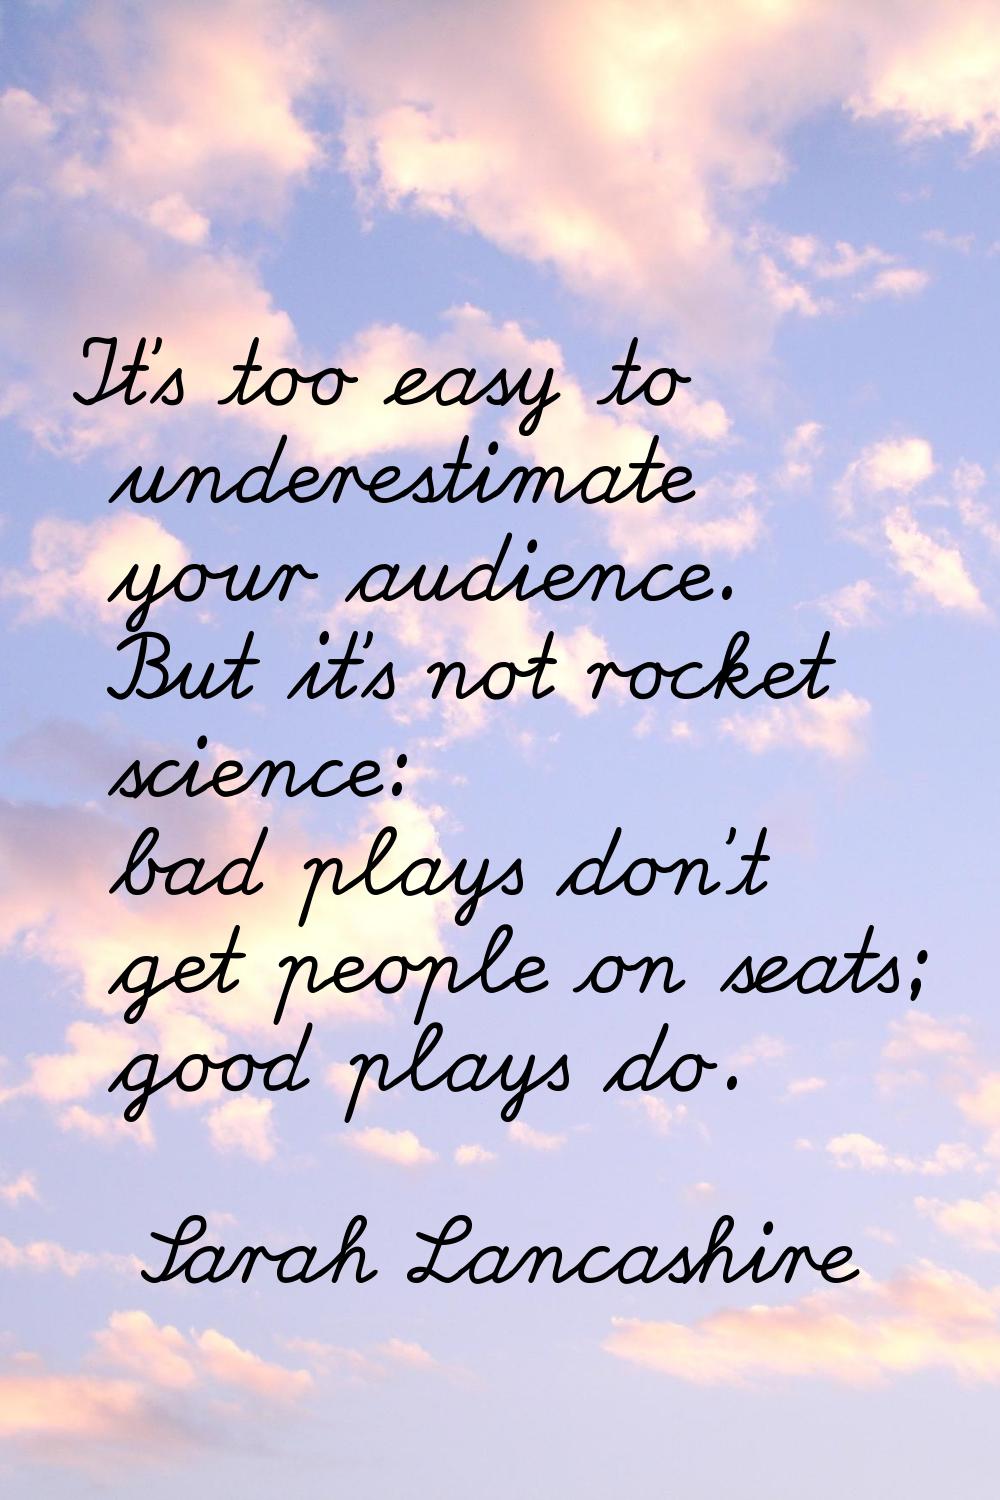 It's too easy to underestimate your audience. But it's not rocket science: bad plays don't get peop